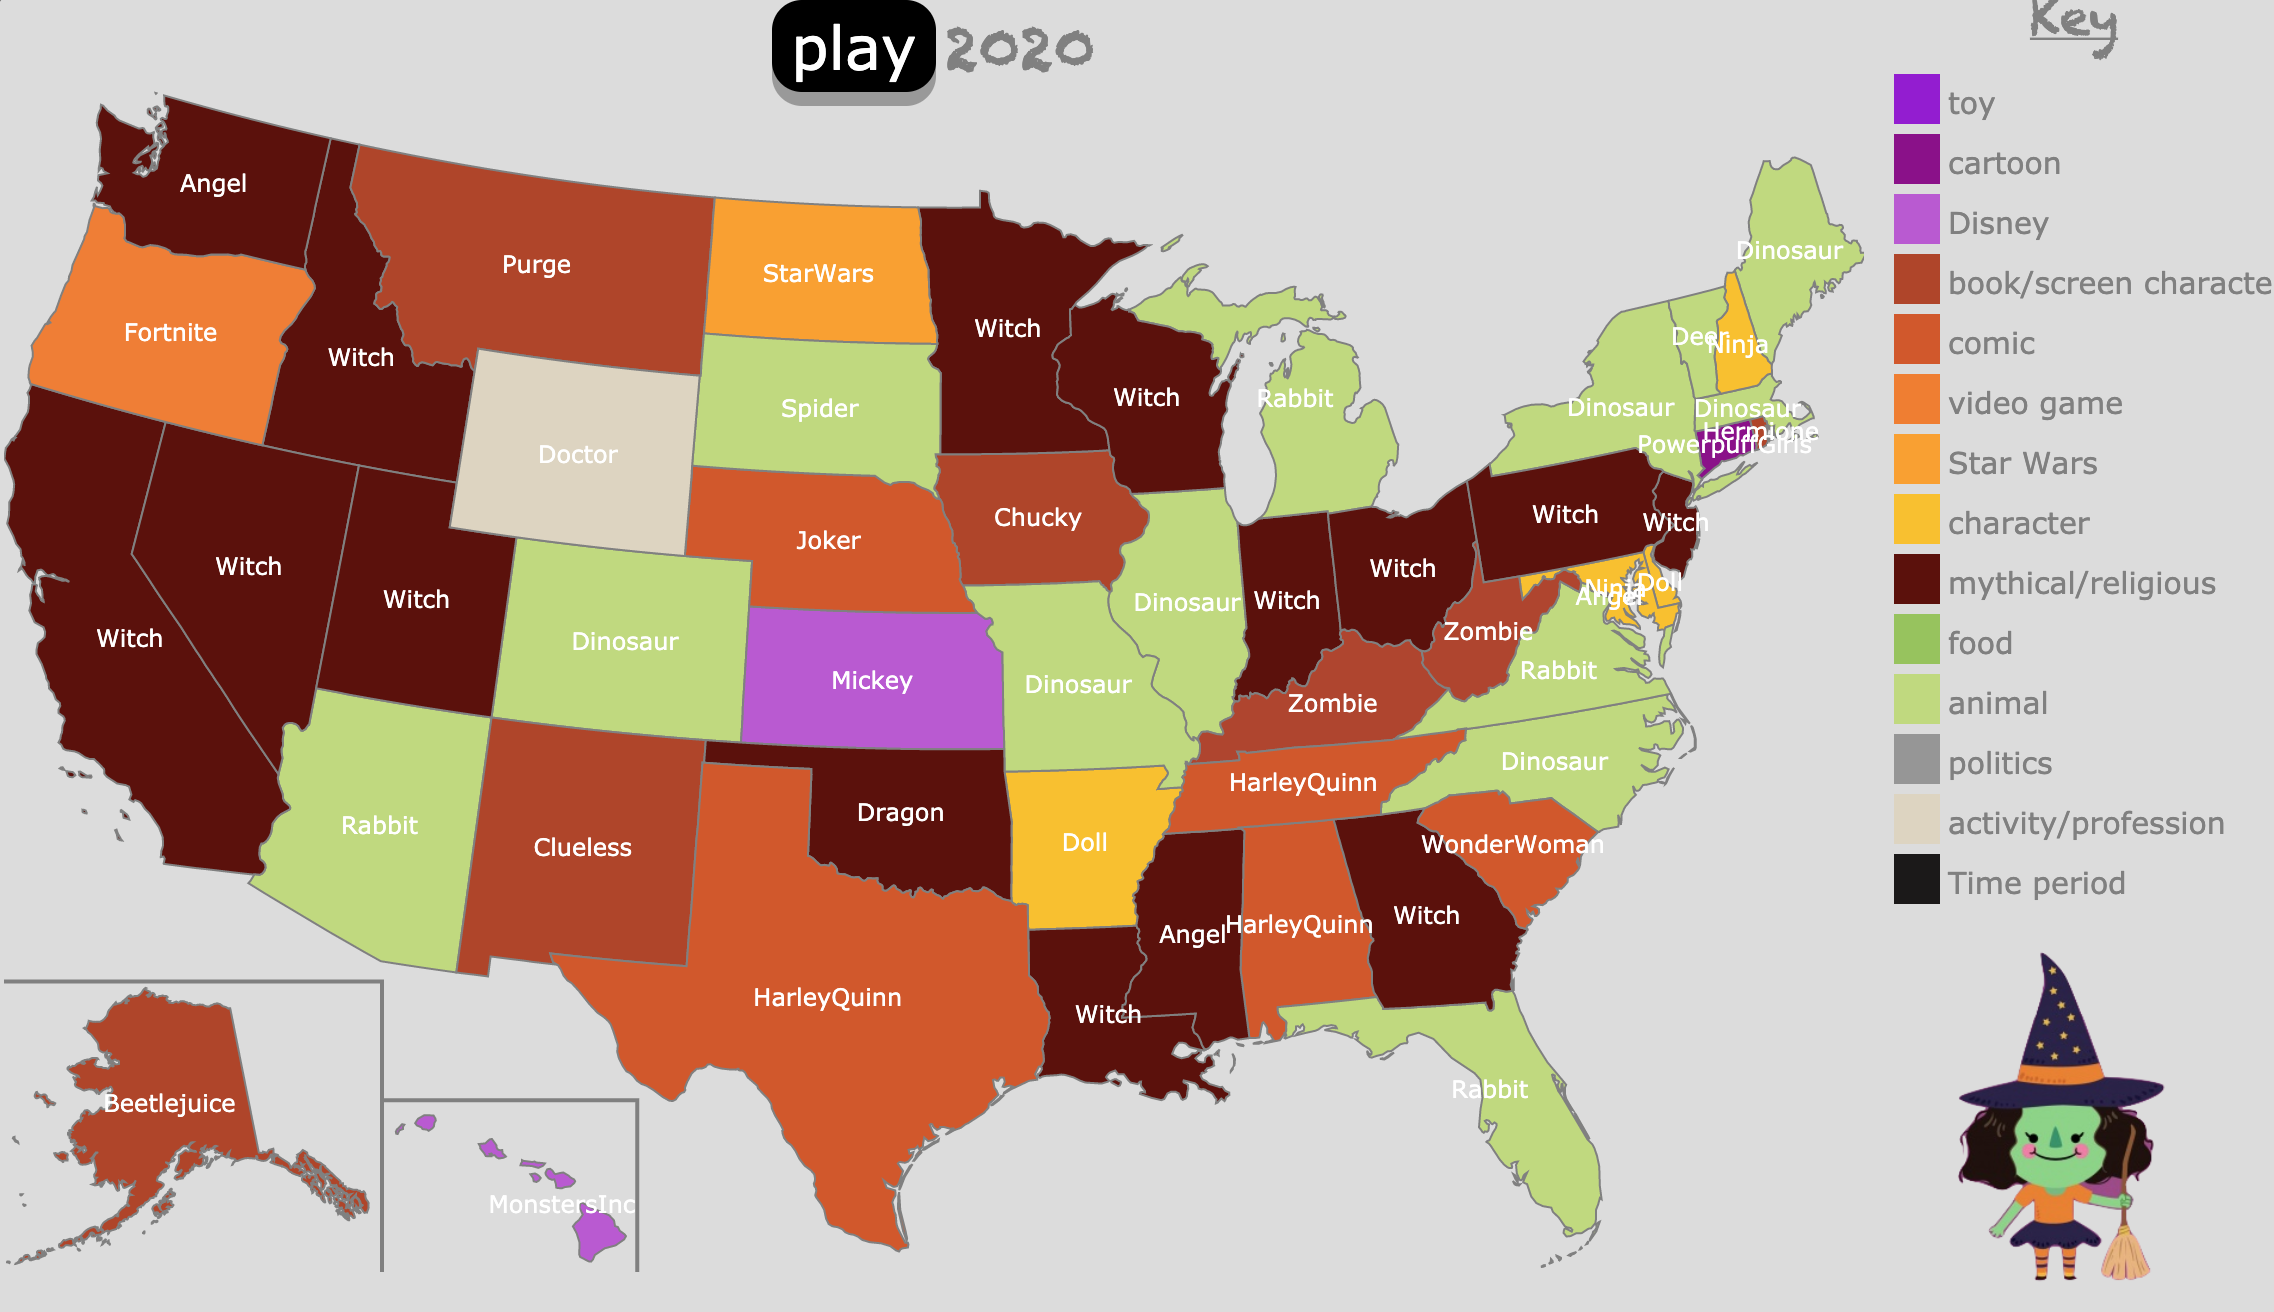 Map of favorite Halloween costume by state